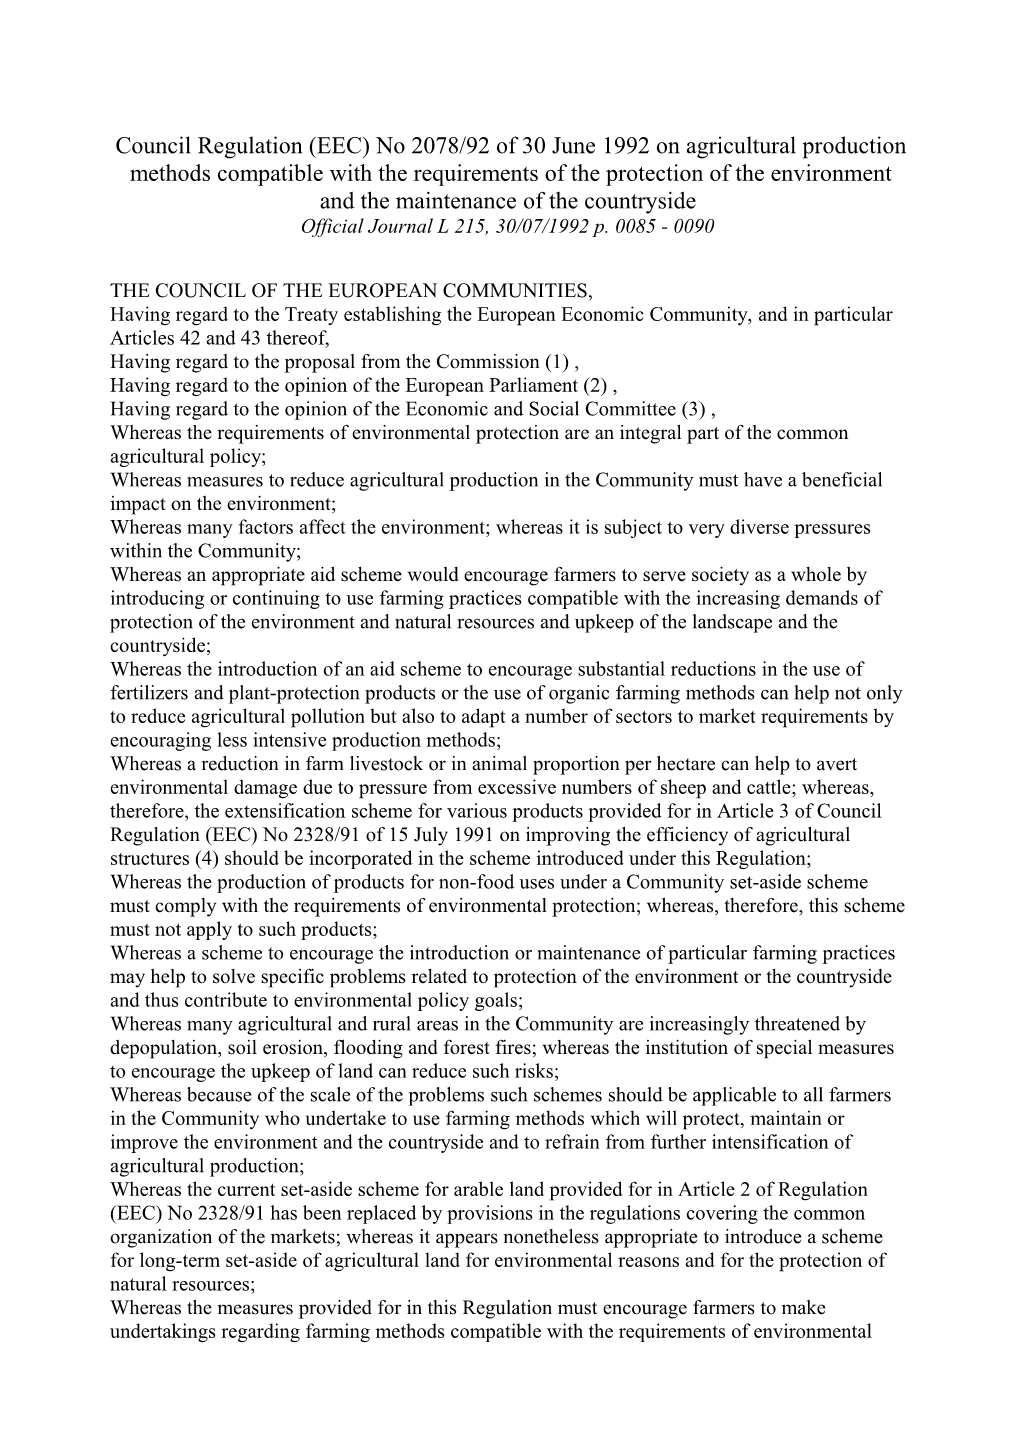 Council Regulation (EEC) No 2078/92 of 30 June 1992 on Agricultural Production Methods